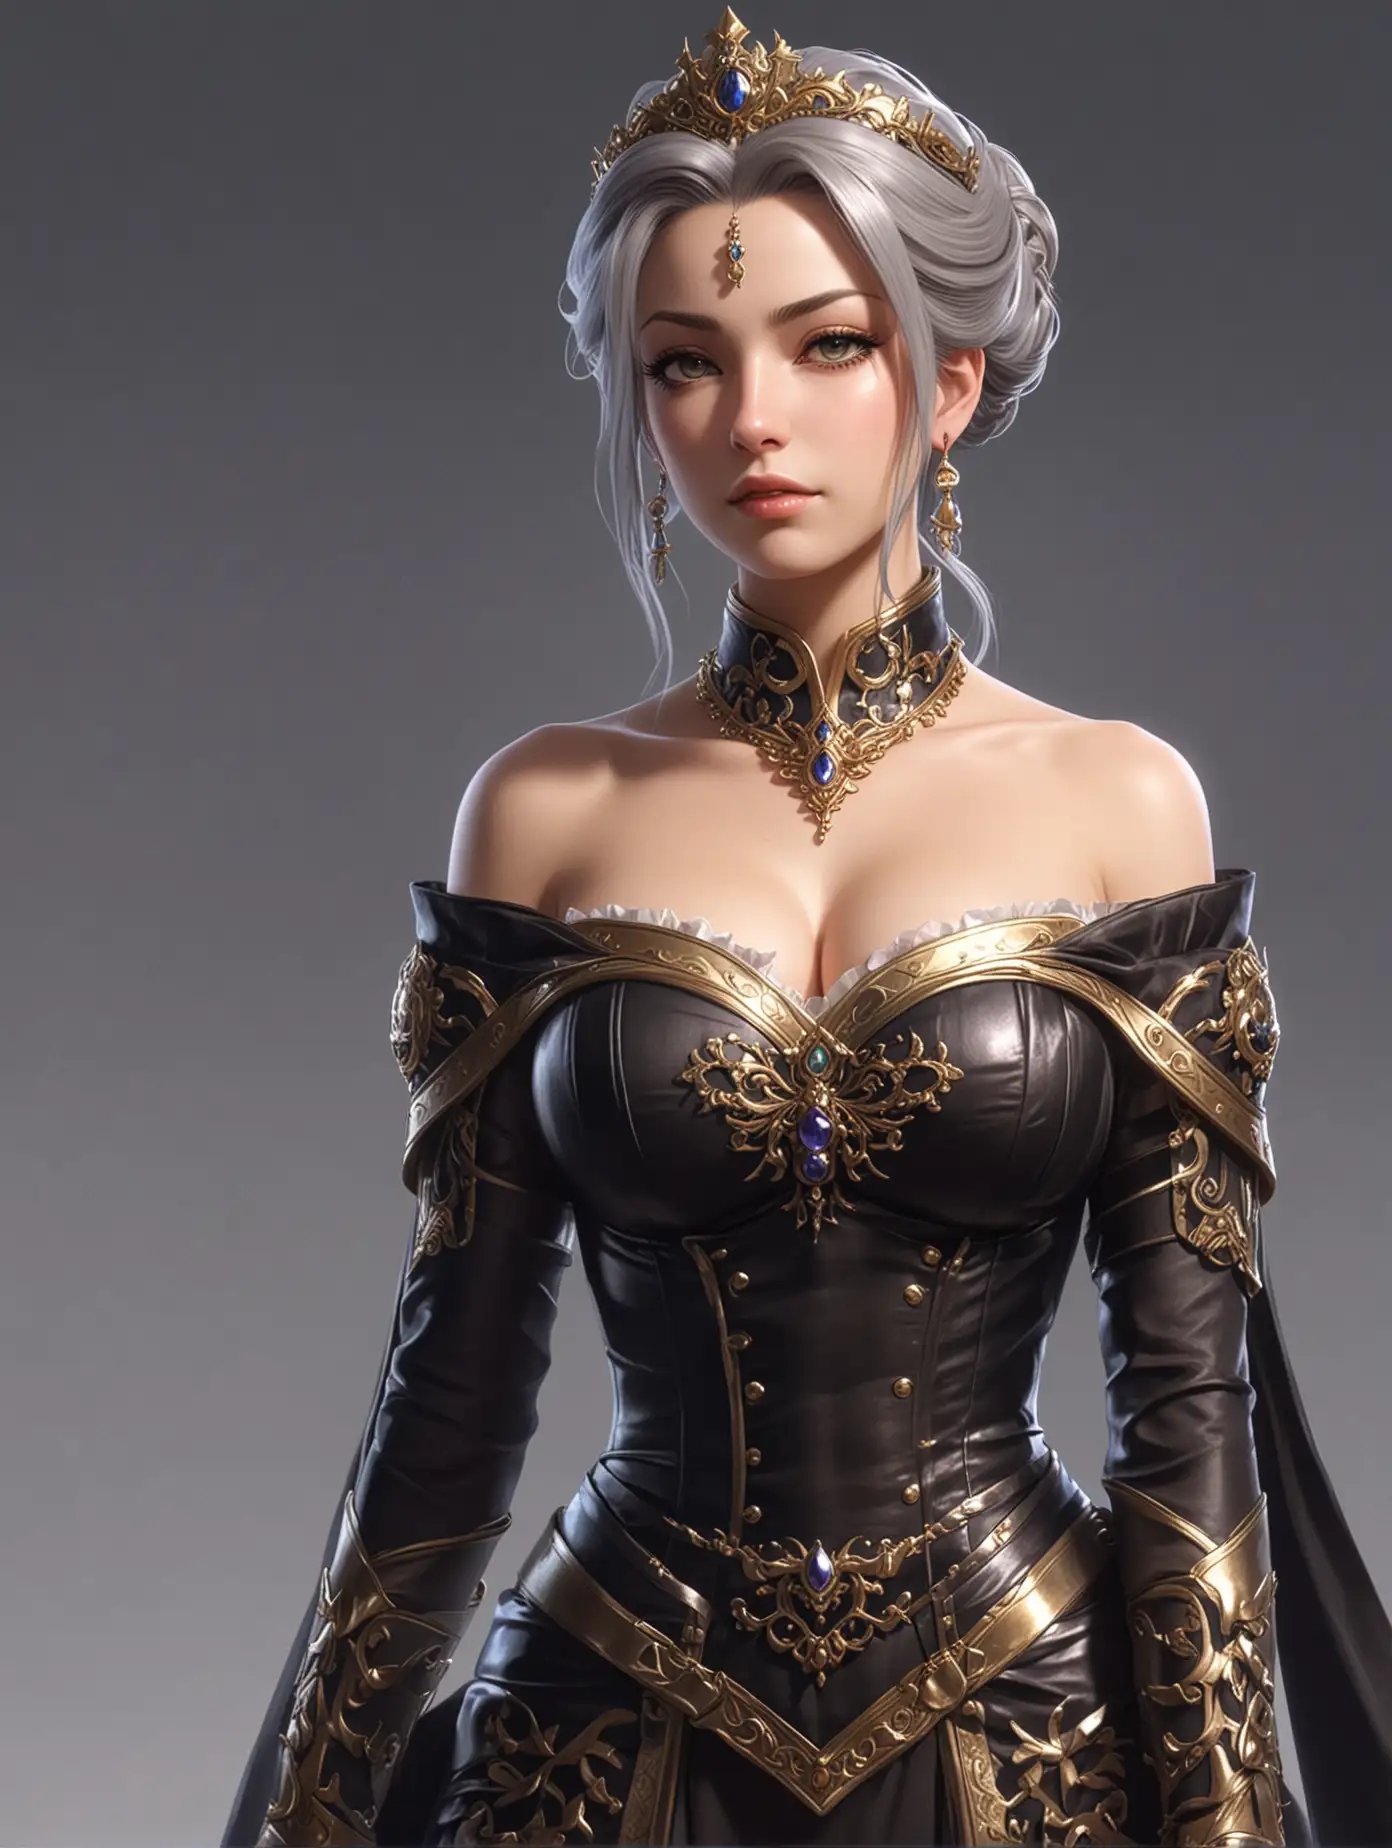 jrpg, adult woman, antagonist, empress, smug, revealing dark regal dress, confident, sexy, fantasy, another eden, waist up fully in view, portrait, no background, facing slightly to the side, staring at the camera